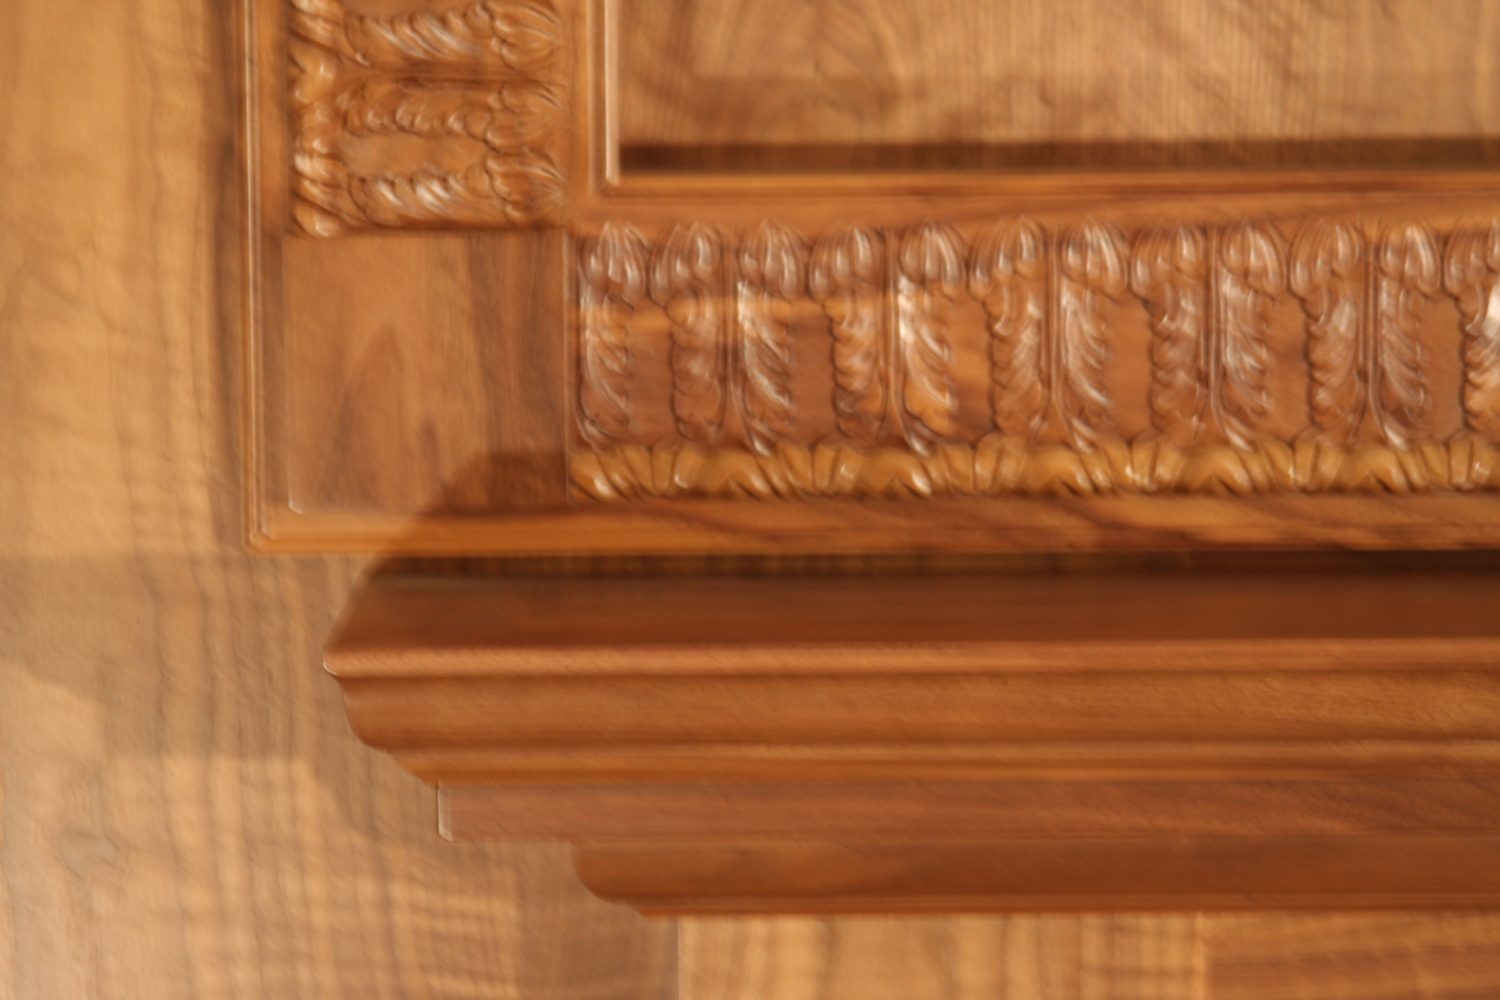 Fireplace Mantel with Acanthus Moulding above